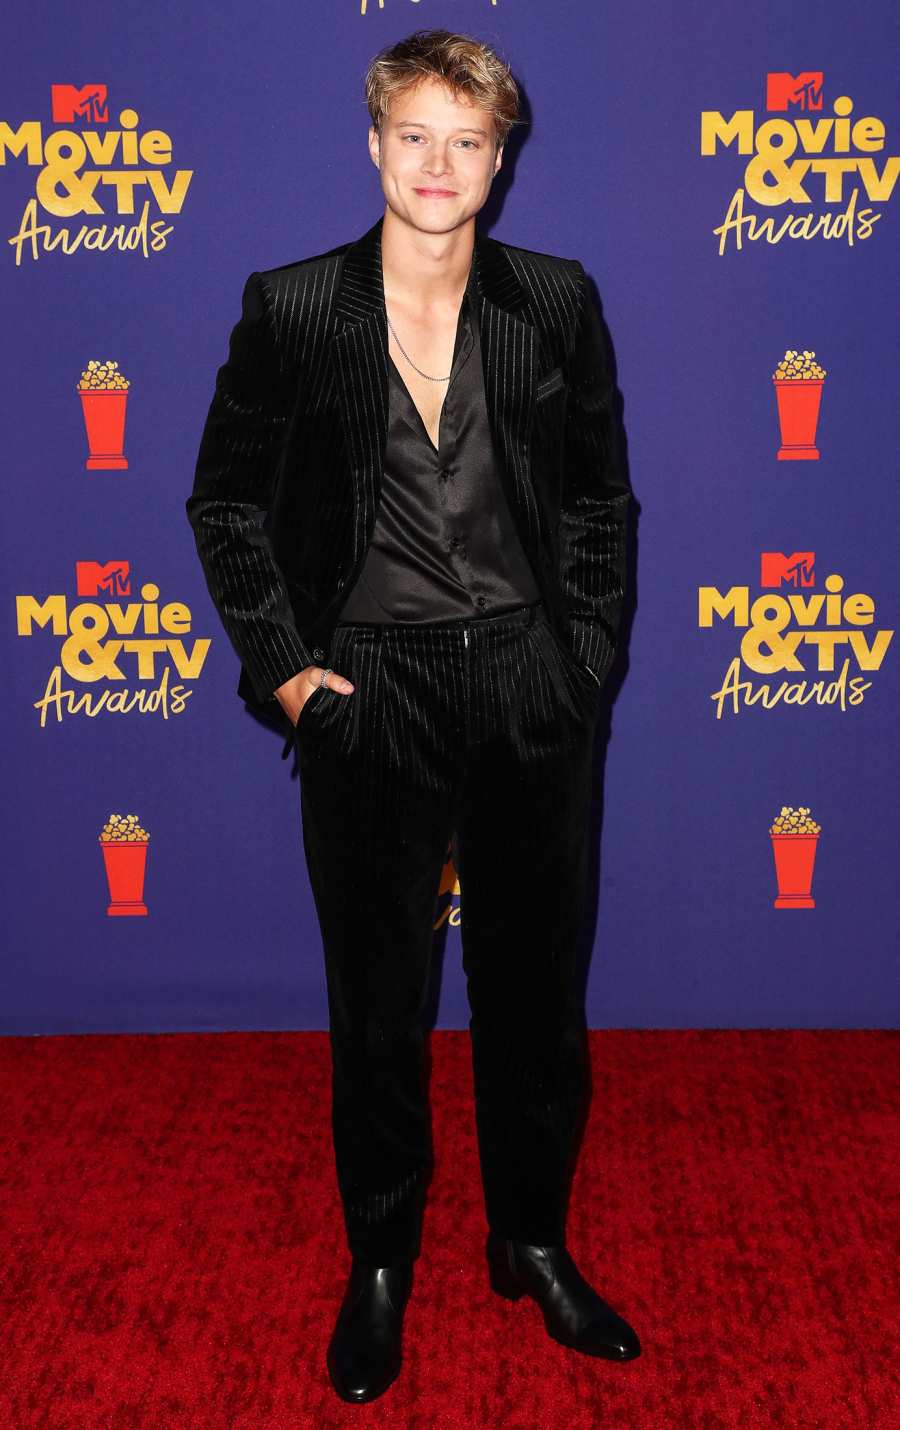 MTV Movie & TV Awards Red Carpet Arrivals - Rudy Pankow